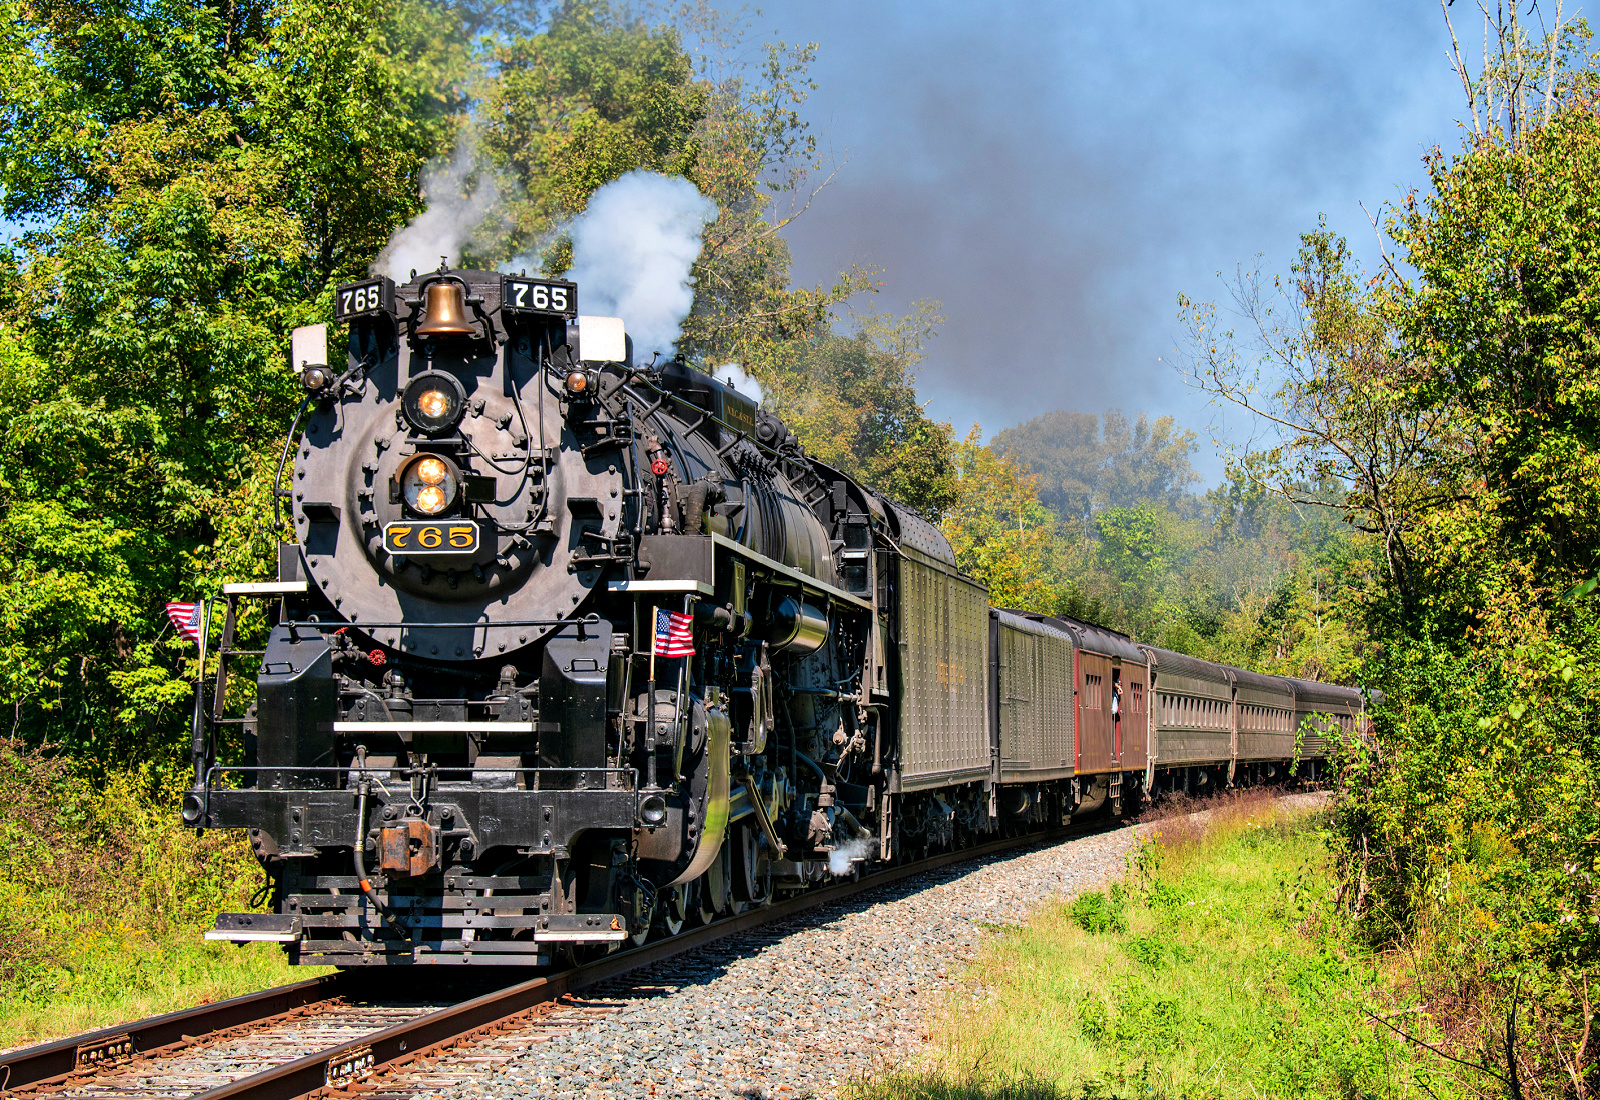 NKP 765 is a class Steam 2-8-4 and  is pictured in Cuyahoga Falls, Ohio, United States.  This was taken along the CVSR Mainline on the Cuyahoga Valley Scenic Railroad. Photo Copyright: David Rohdenburg uploaded to Railroad Gallery on 01/16/2023. This photograph of NKP 765 was taken on Sunday, September 19, 2021. All Rights Reserved. 